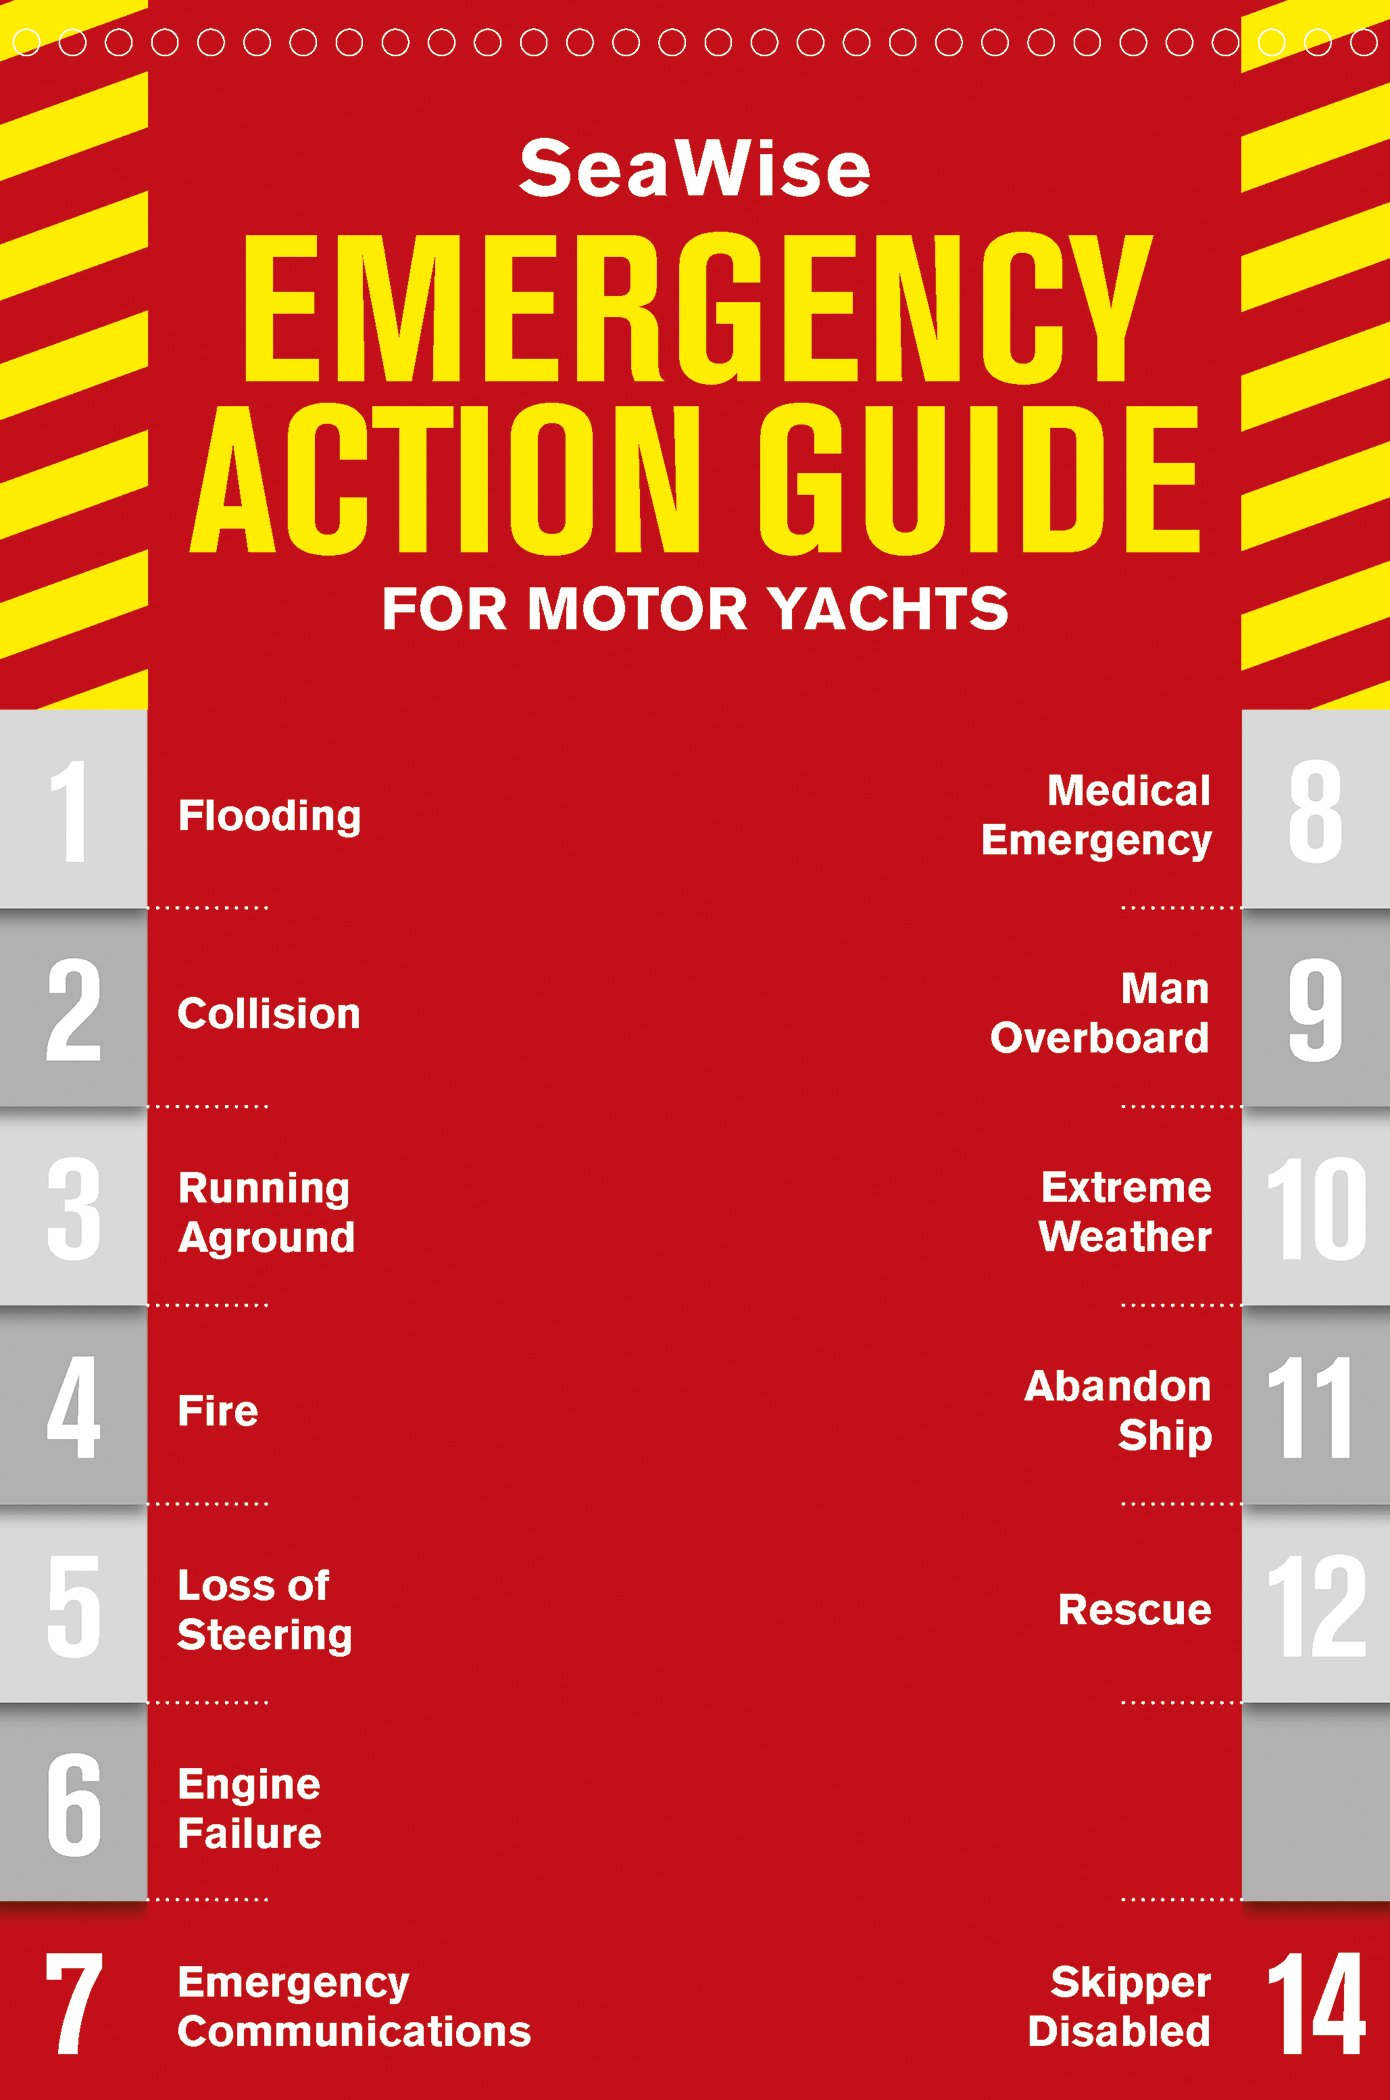 category 1 yacht safety requirements